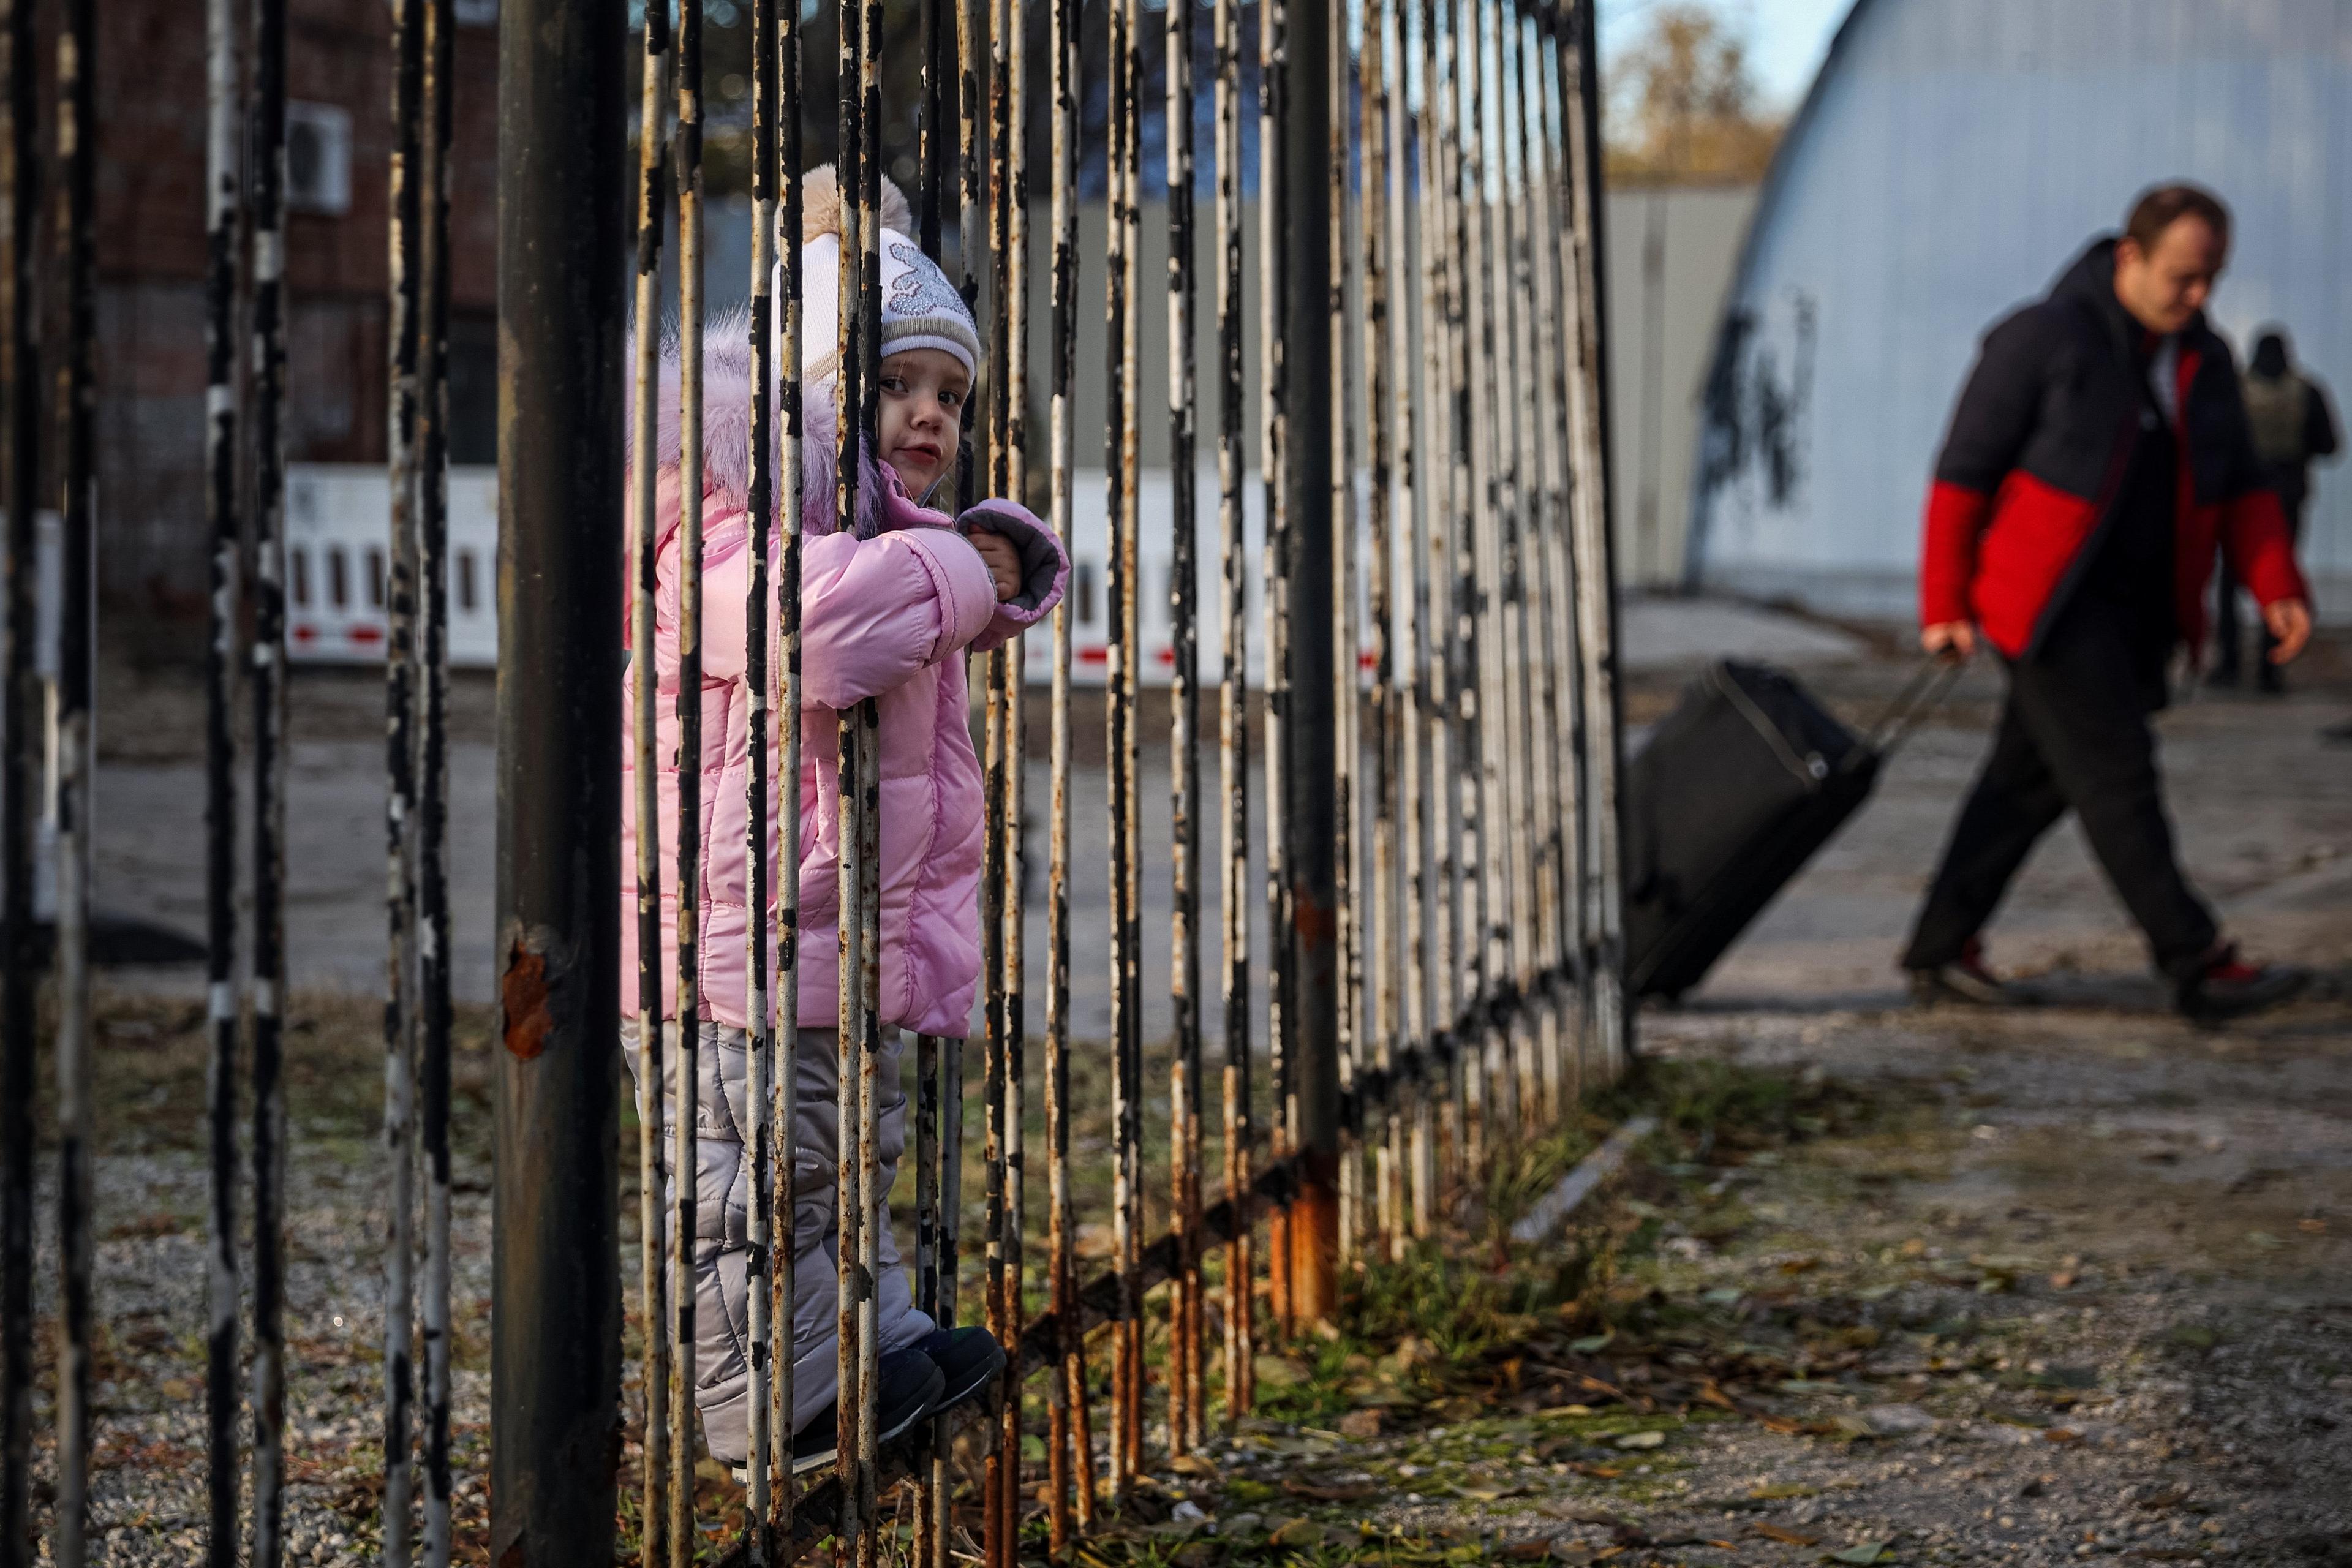 A child looks through a fence as war-displaced Ukrainians arrive from the Russian-held town of Berdyansk, at a humanitarian relief centre in the central Ukrainian city of Zaporizhzhia on November 7, 2022, amid the Russian military invasion on Ukraine. - Psychiatrists at the humanitarian relief centre prepare to receive those displaced by war, offering them immediate counselling and further guidance. (Photo by ANATOLII STEPANOV / AFP)